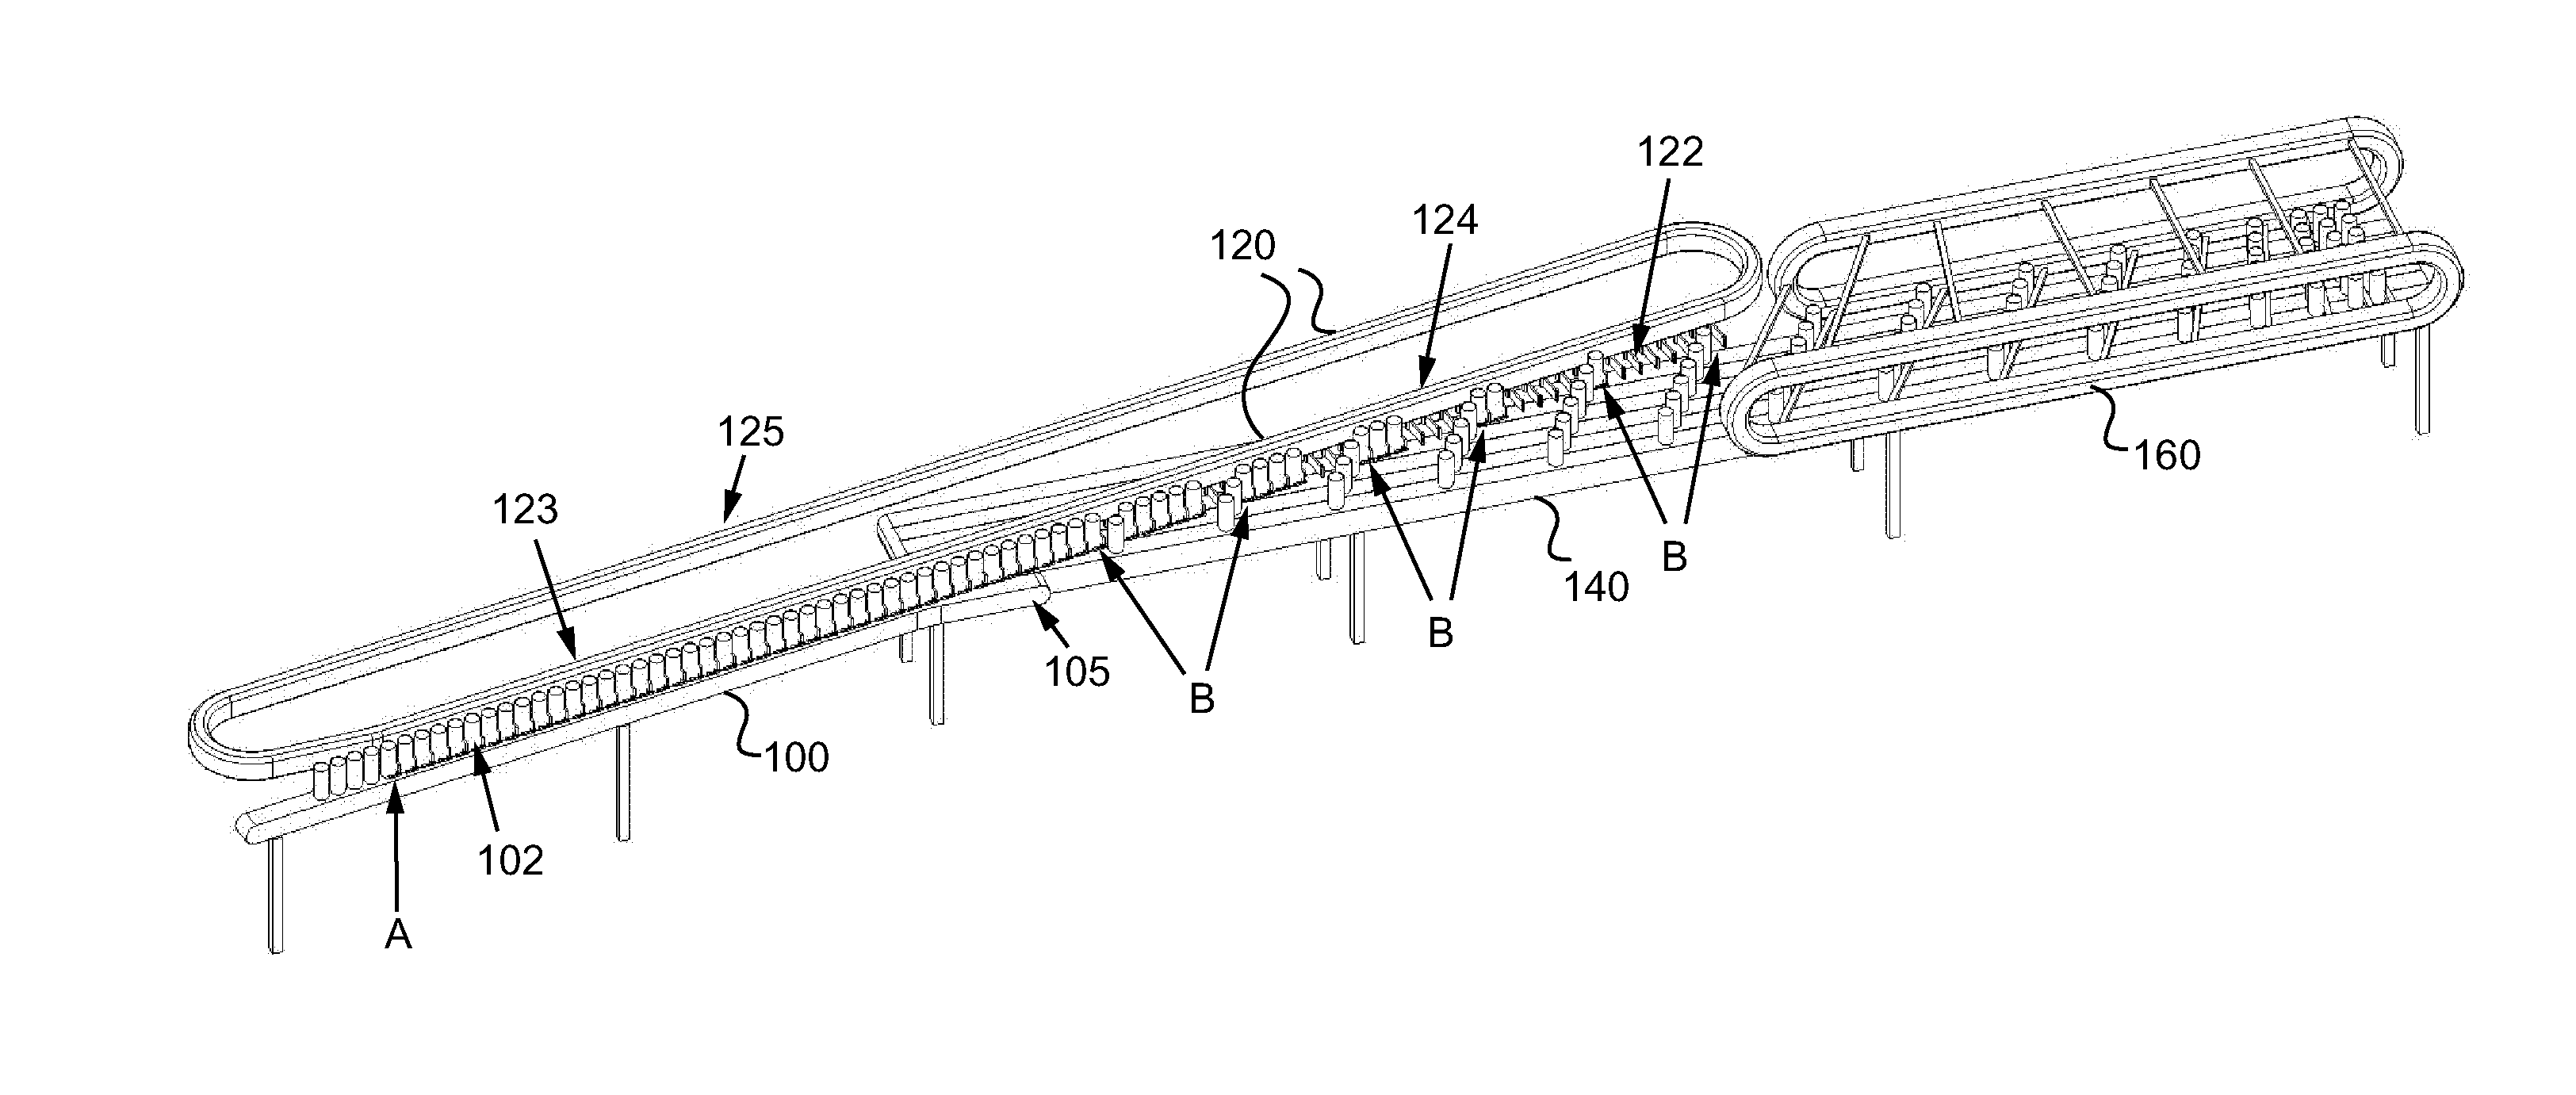 Device and Method for Distributing and Grouping Containers